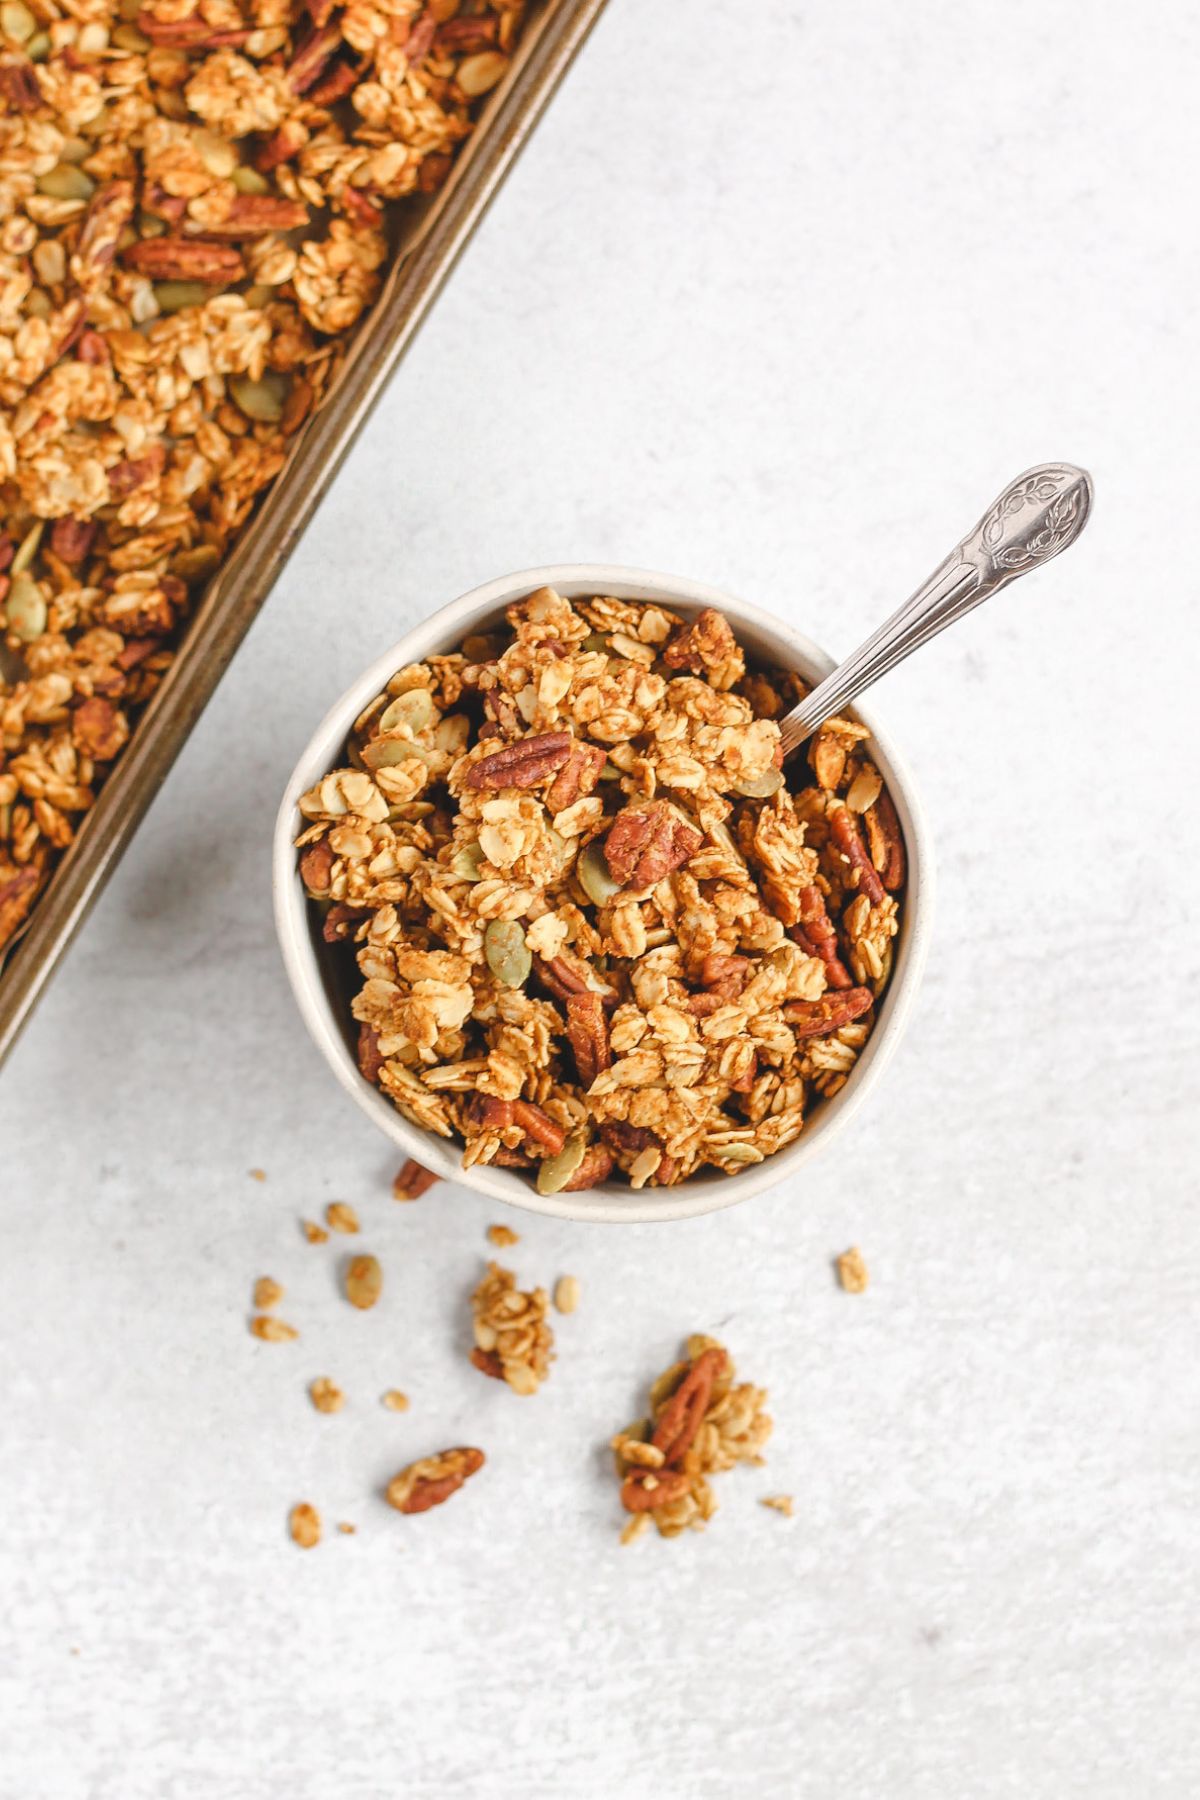 Pumpkin granola in a small bowl with a vintage spoon sitting next to baking sheet with granola.